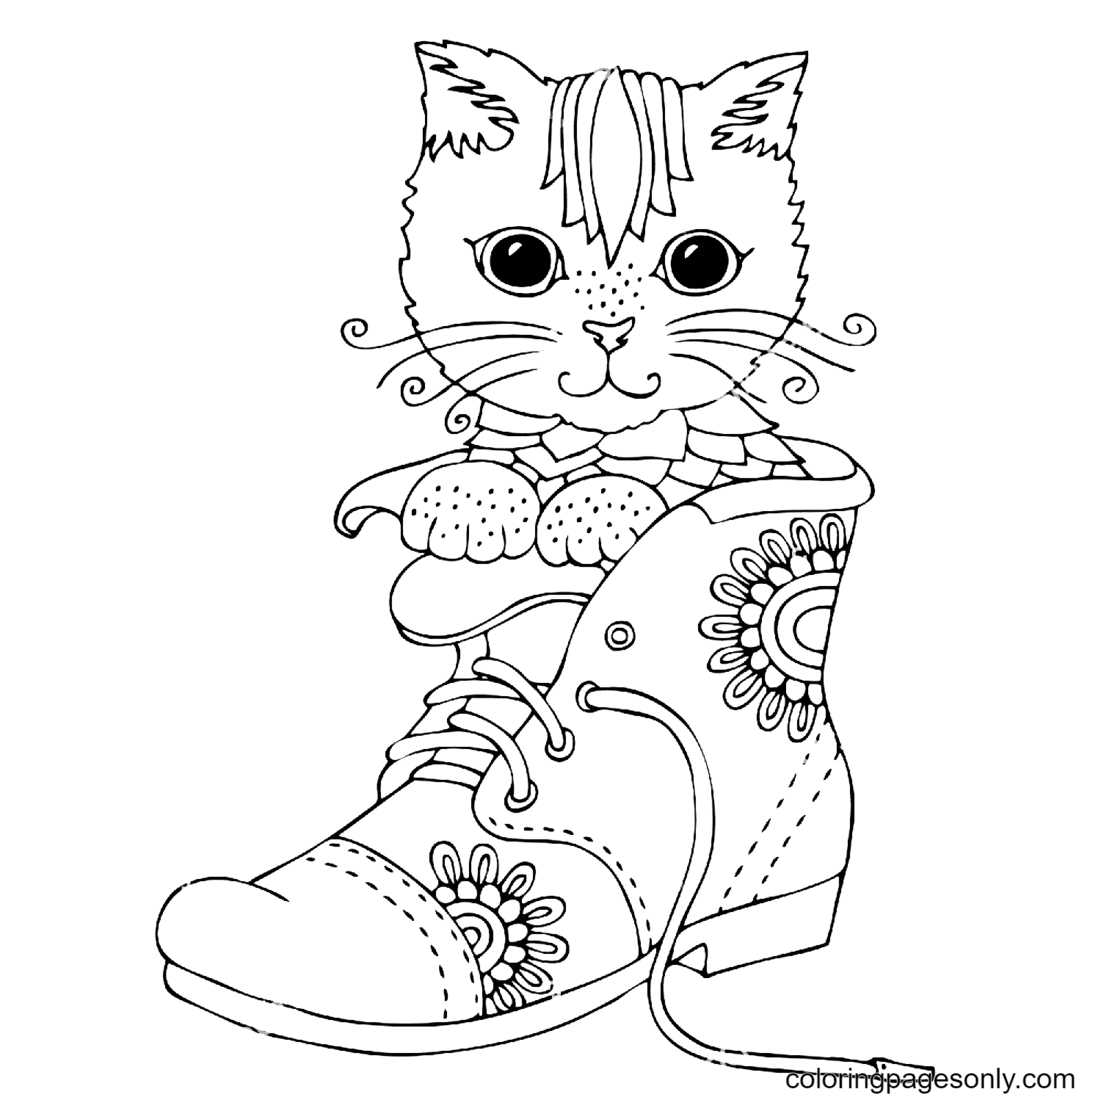 Kitten in Boot Coloring Page